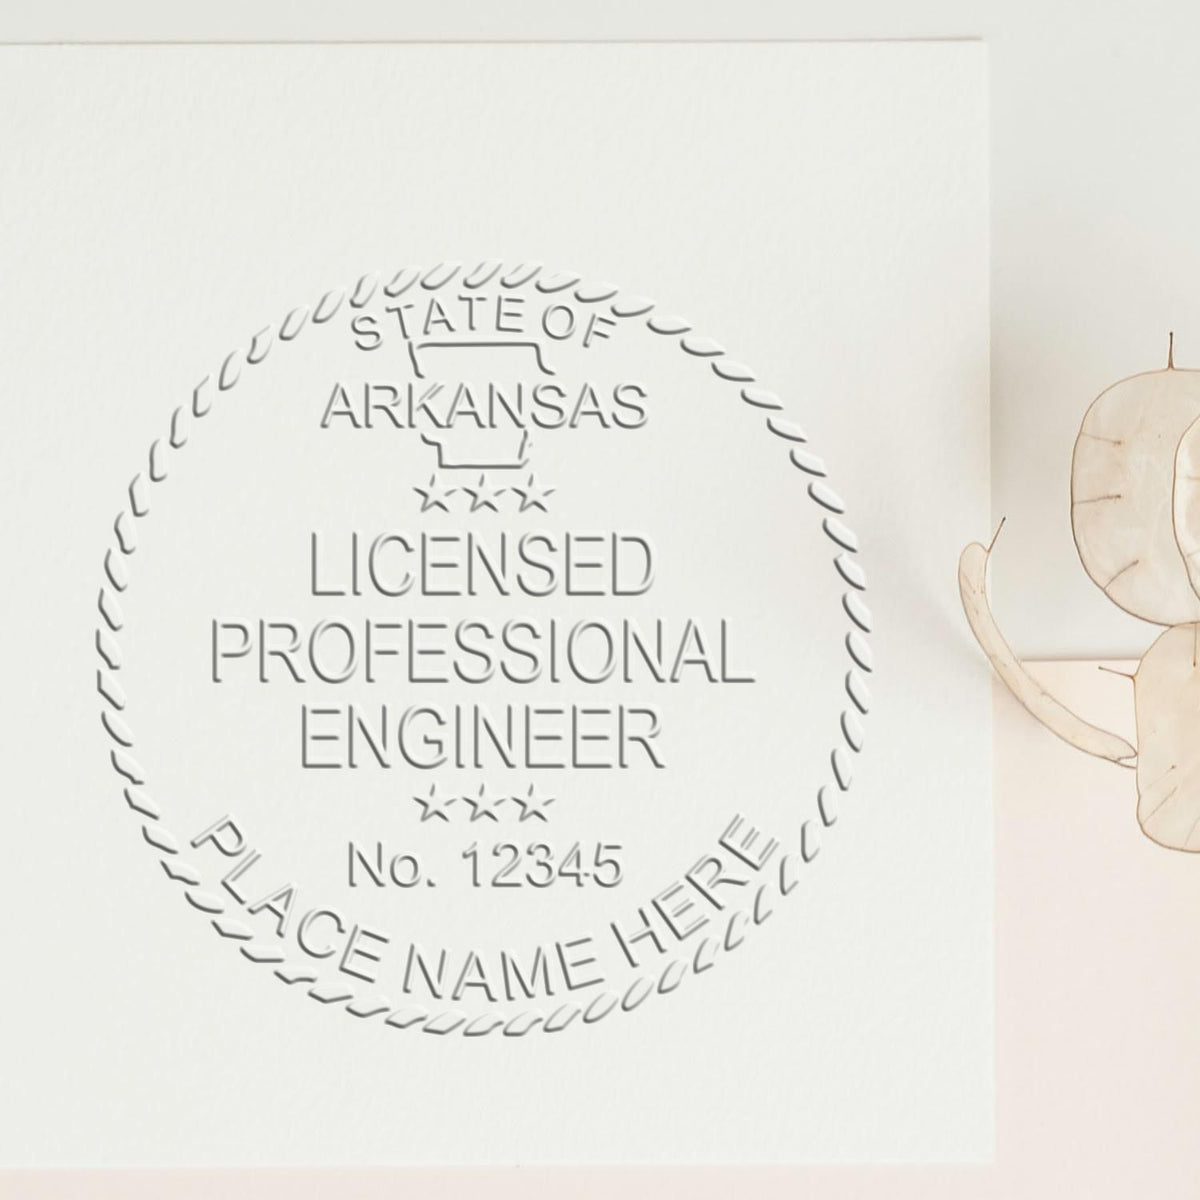 A photograph of the Hybrid Arkansas Engineer Seal stamp impression reveals a vivid, professional image of the on paper.